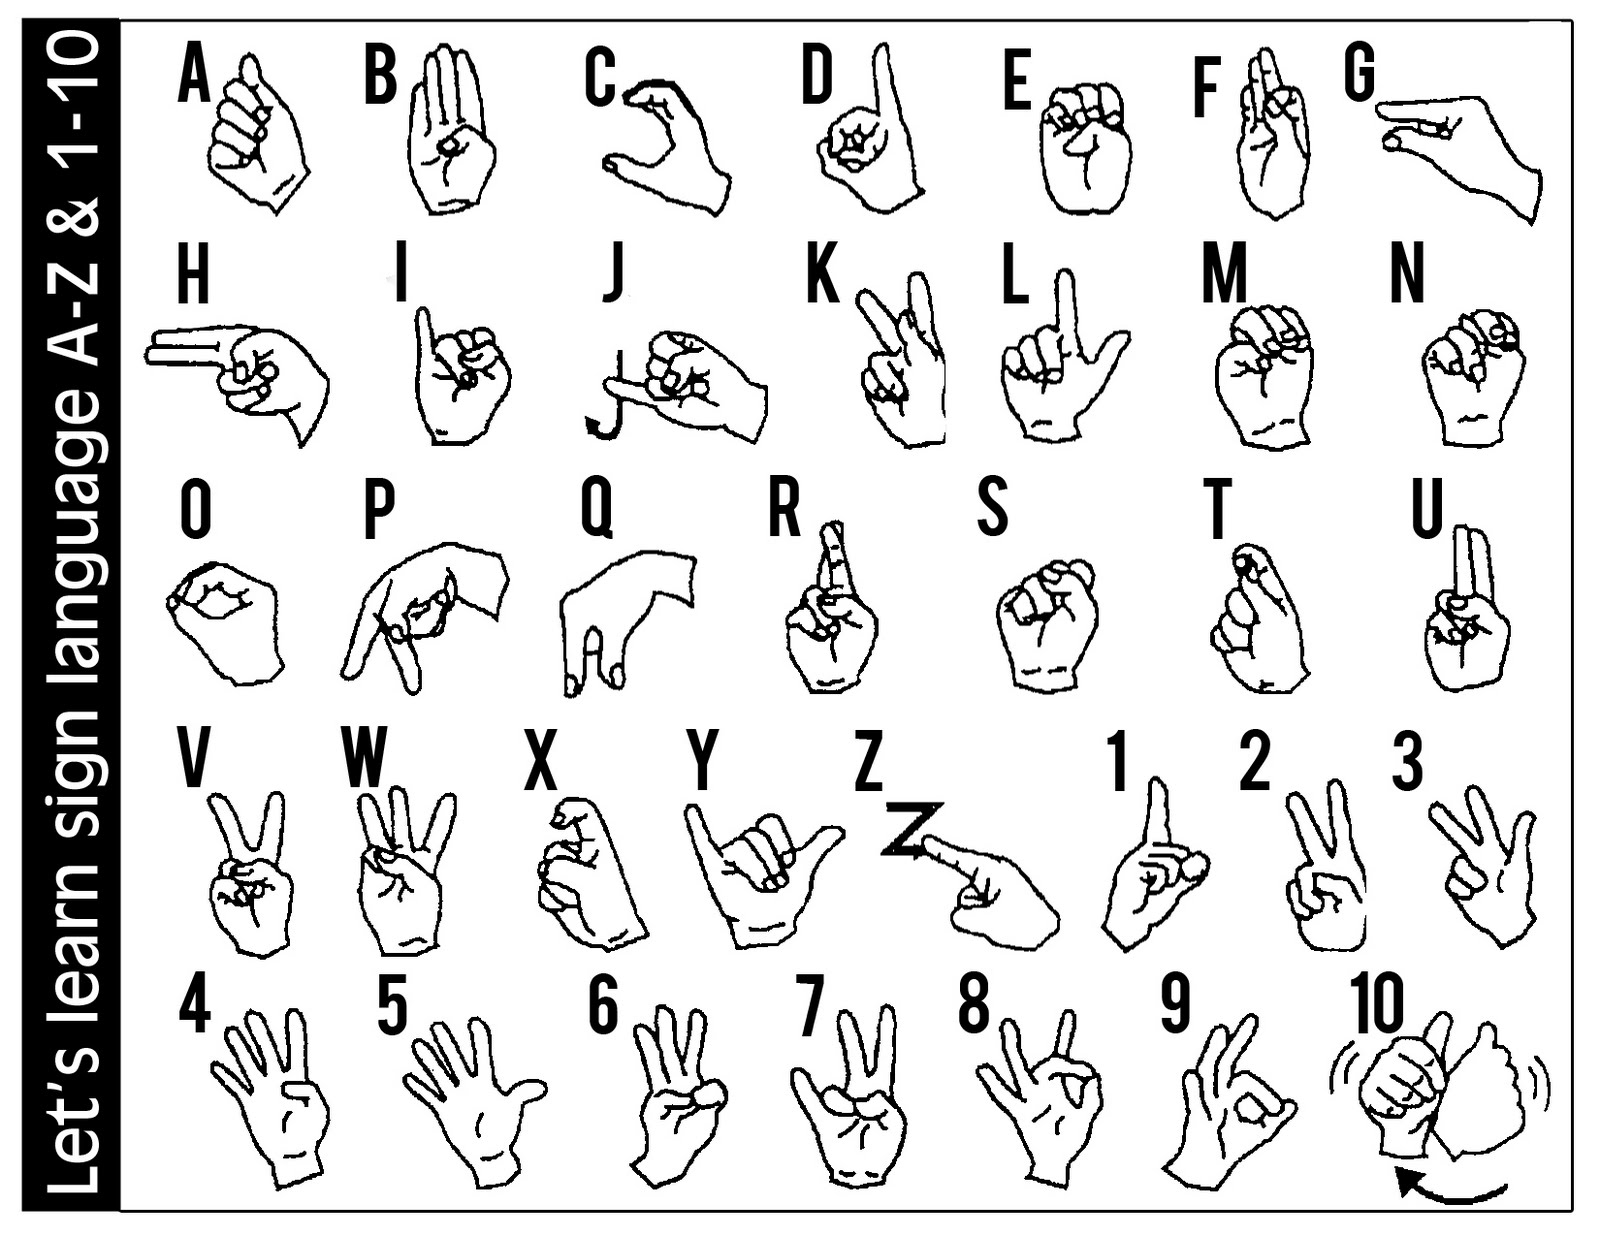 la-salle-university-ozamiz-school-for-the-deaf-communicate-without-borders-learn-sign-language